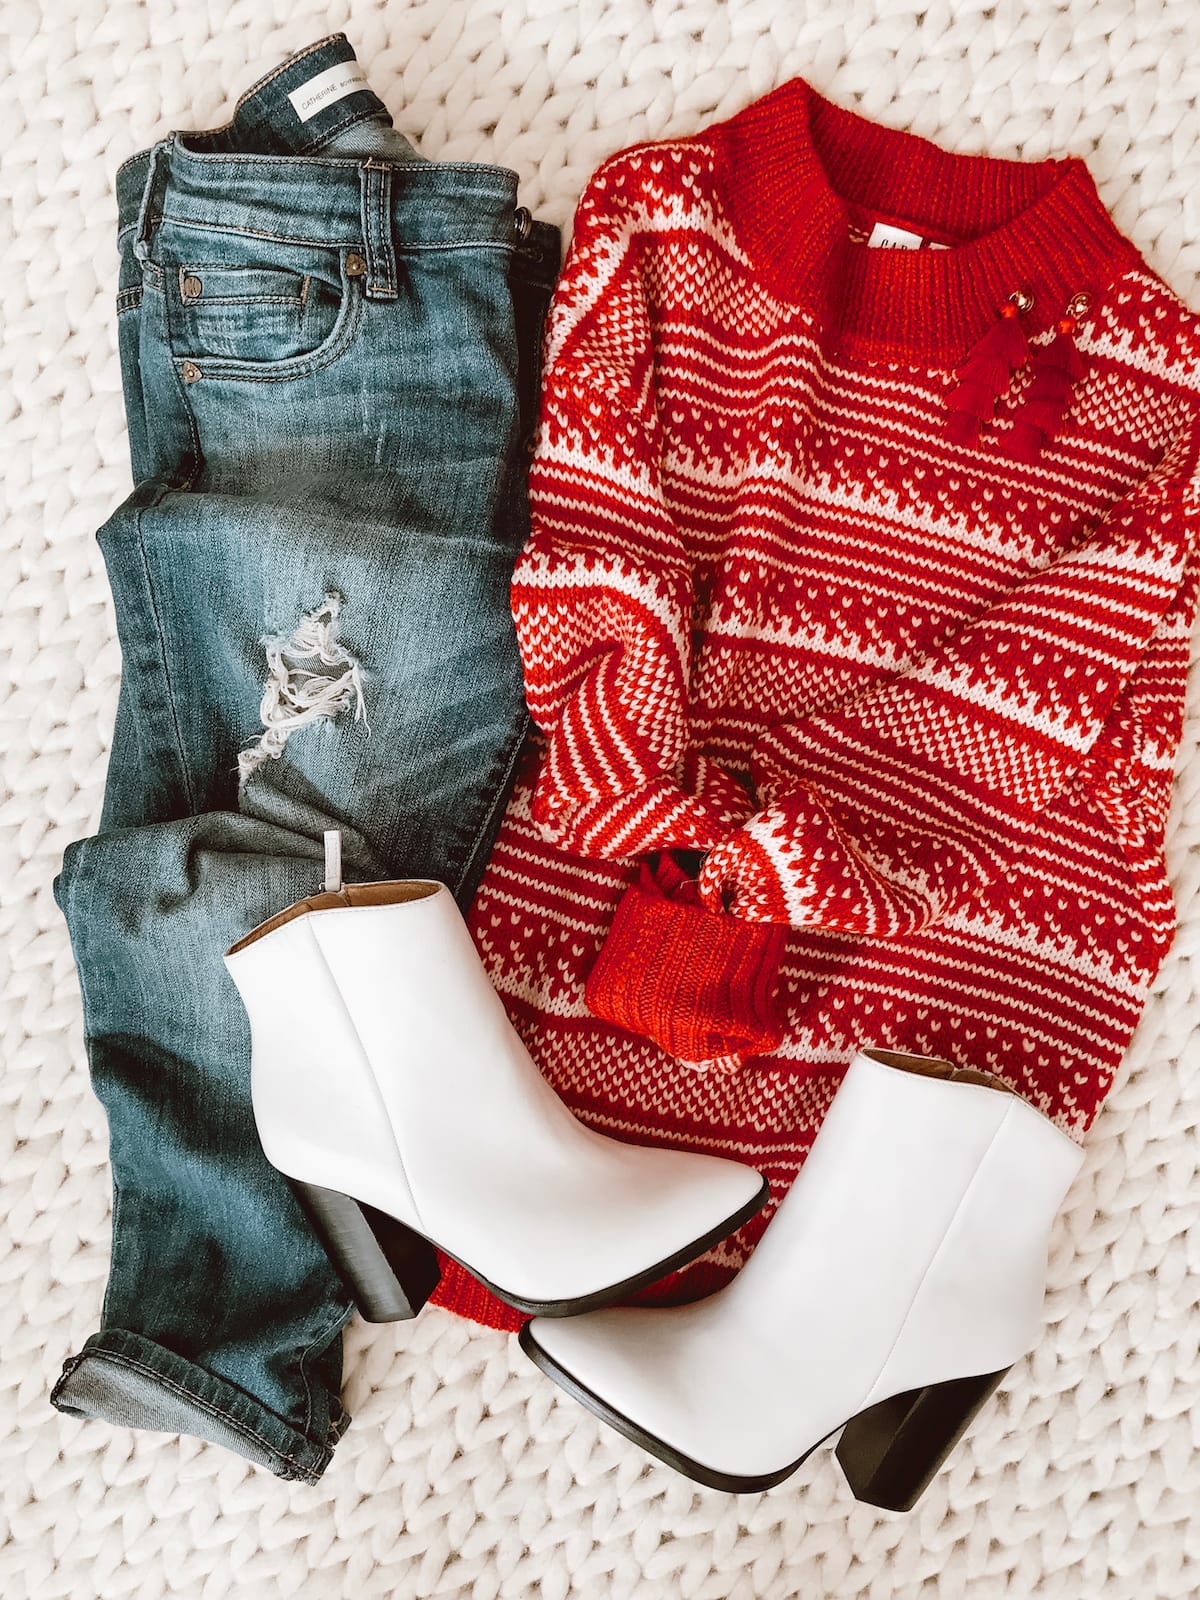 Winter outfit - red sweater jeans and white booties